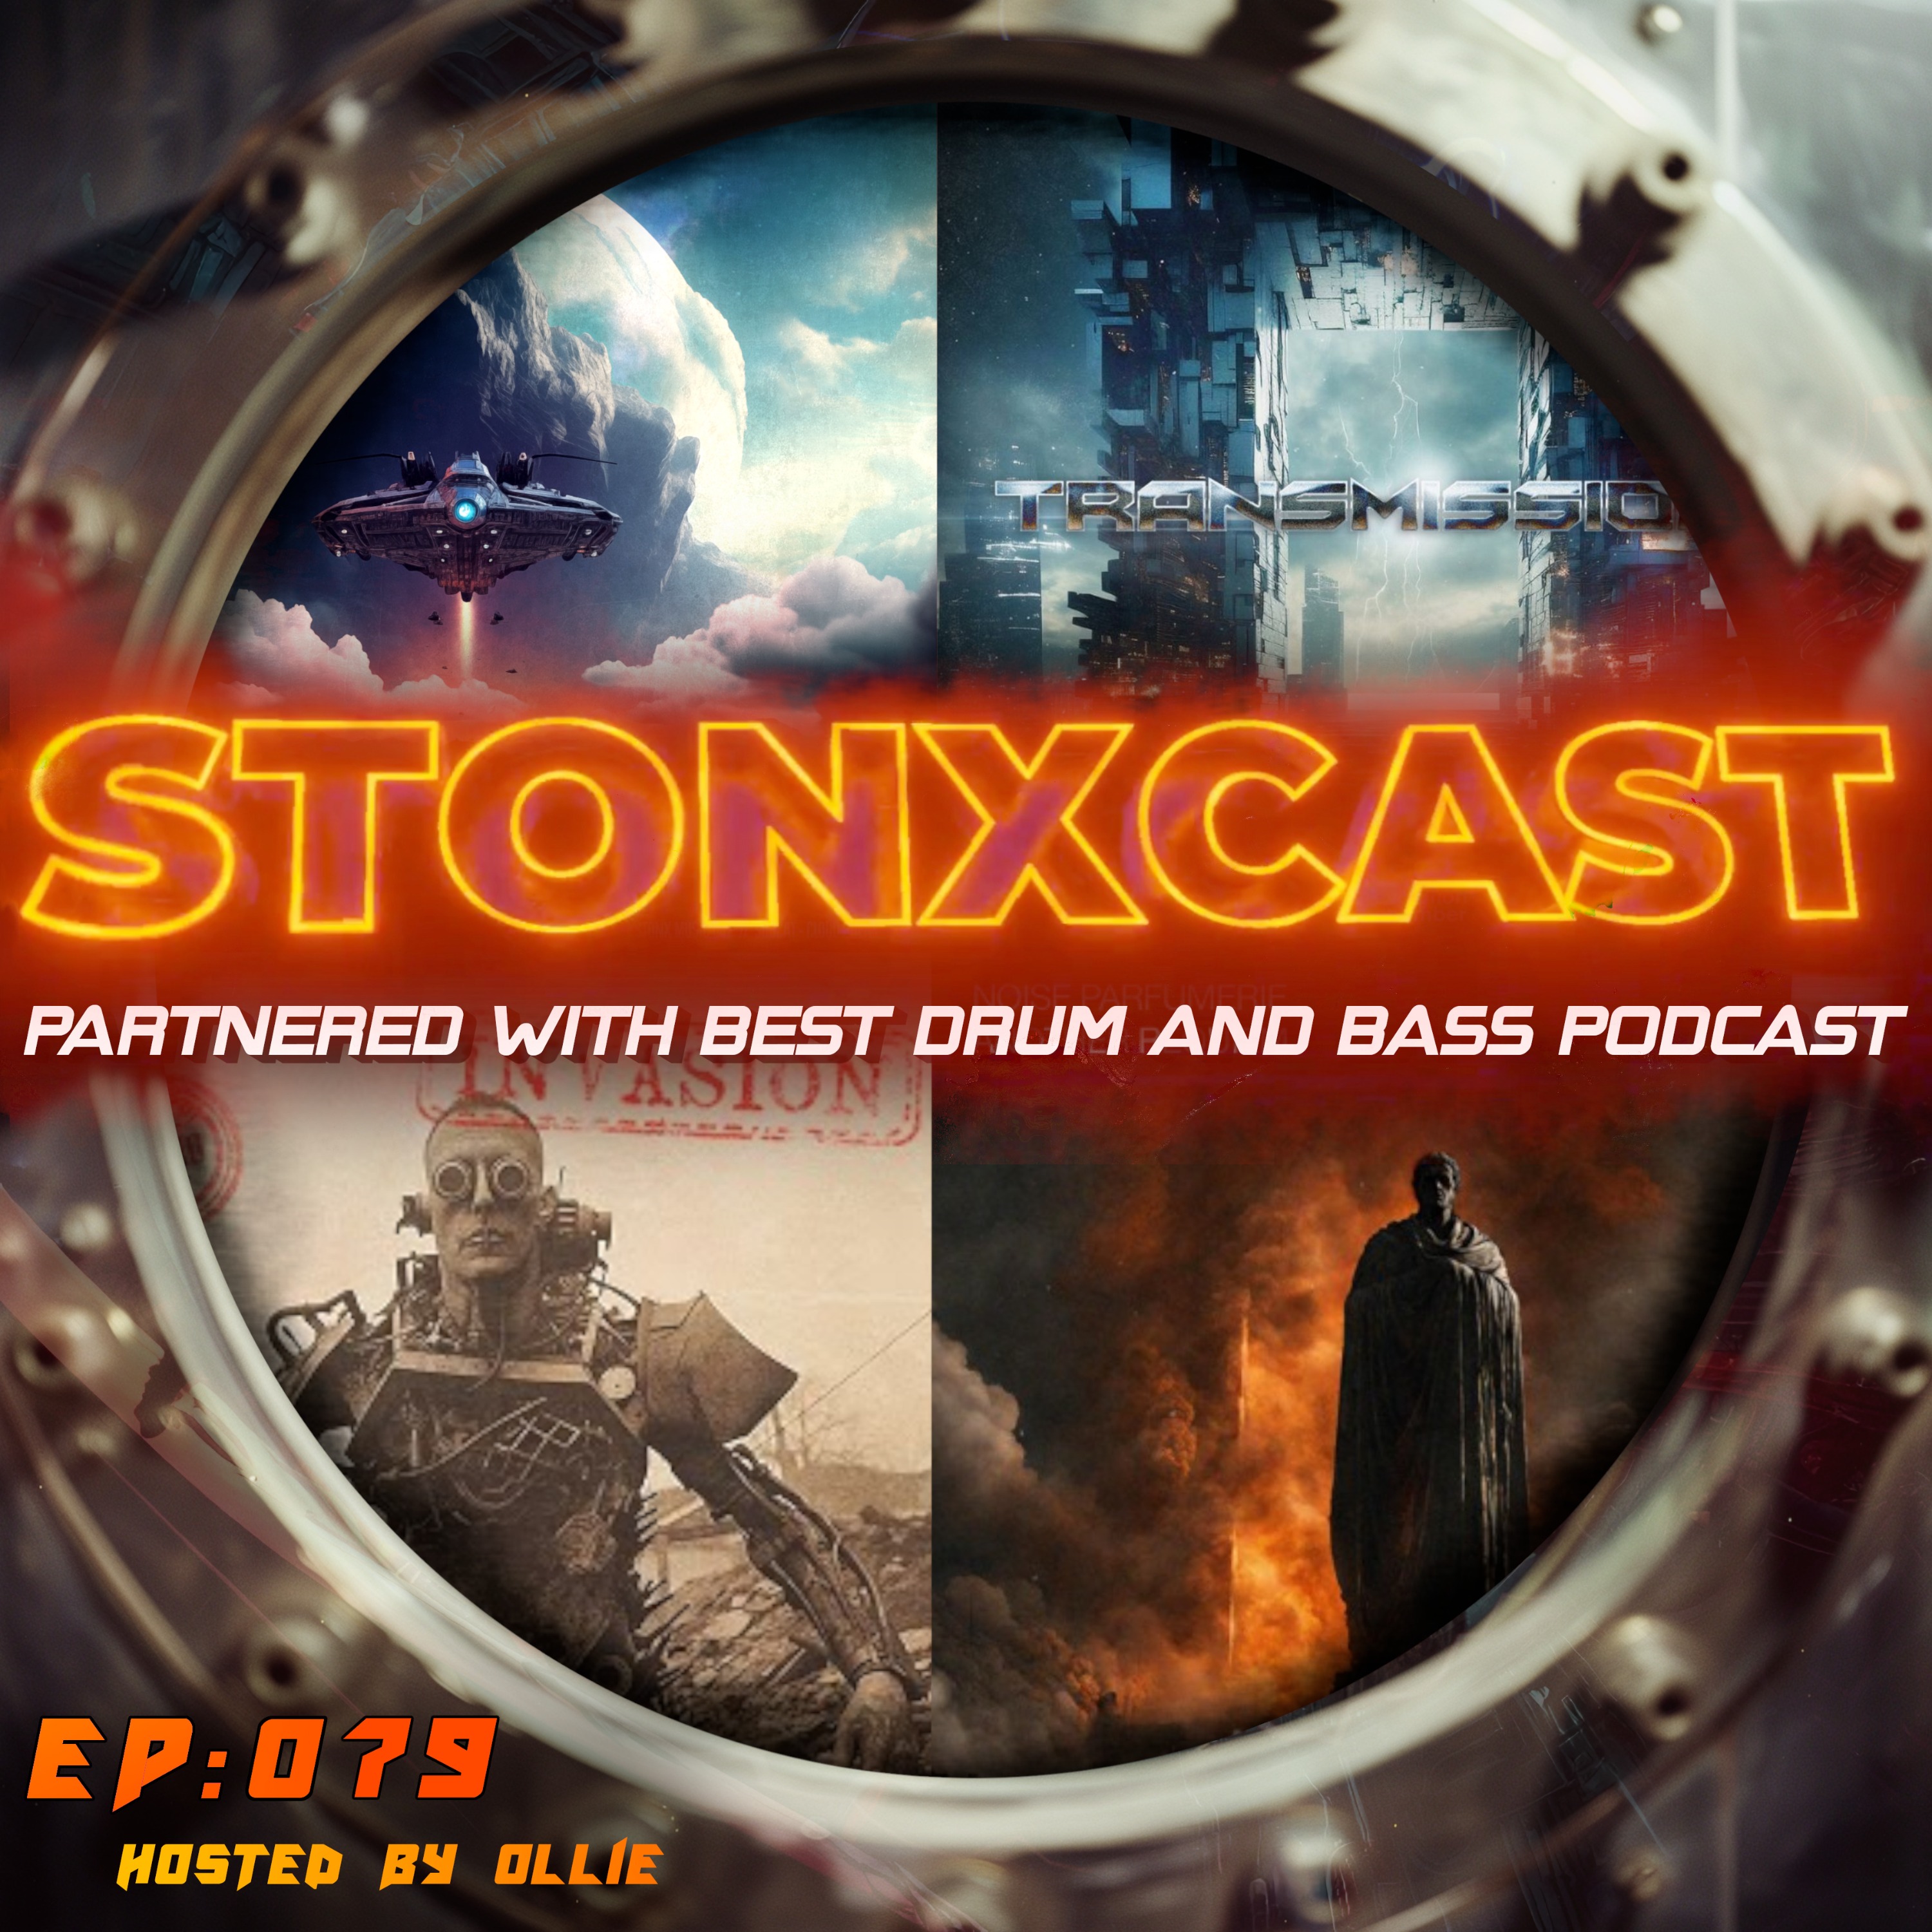 Stonxcast EP:079 - Hosted by Ollie Artwork